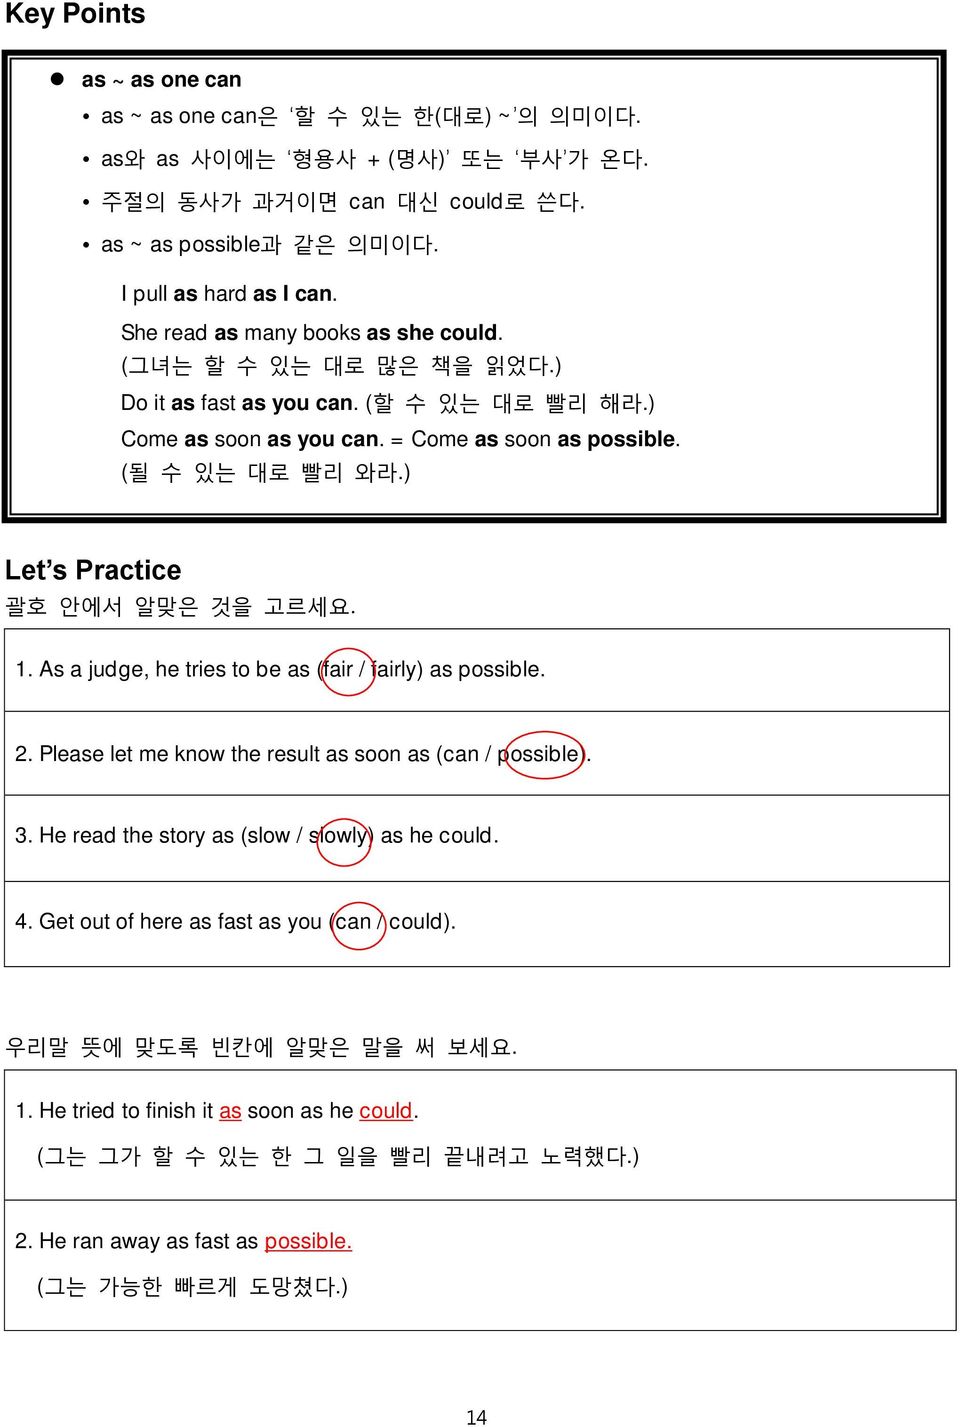 ) Let s Practice 괄호 안에서 알맞은 것을 고르세요. 1. As a judge, he tries to be as (fair / fairly) as possible. 2. Please let me know the result as soon as (can / possible). 3.